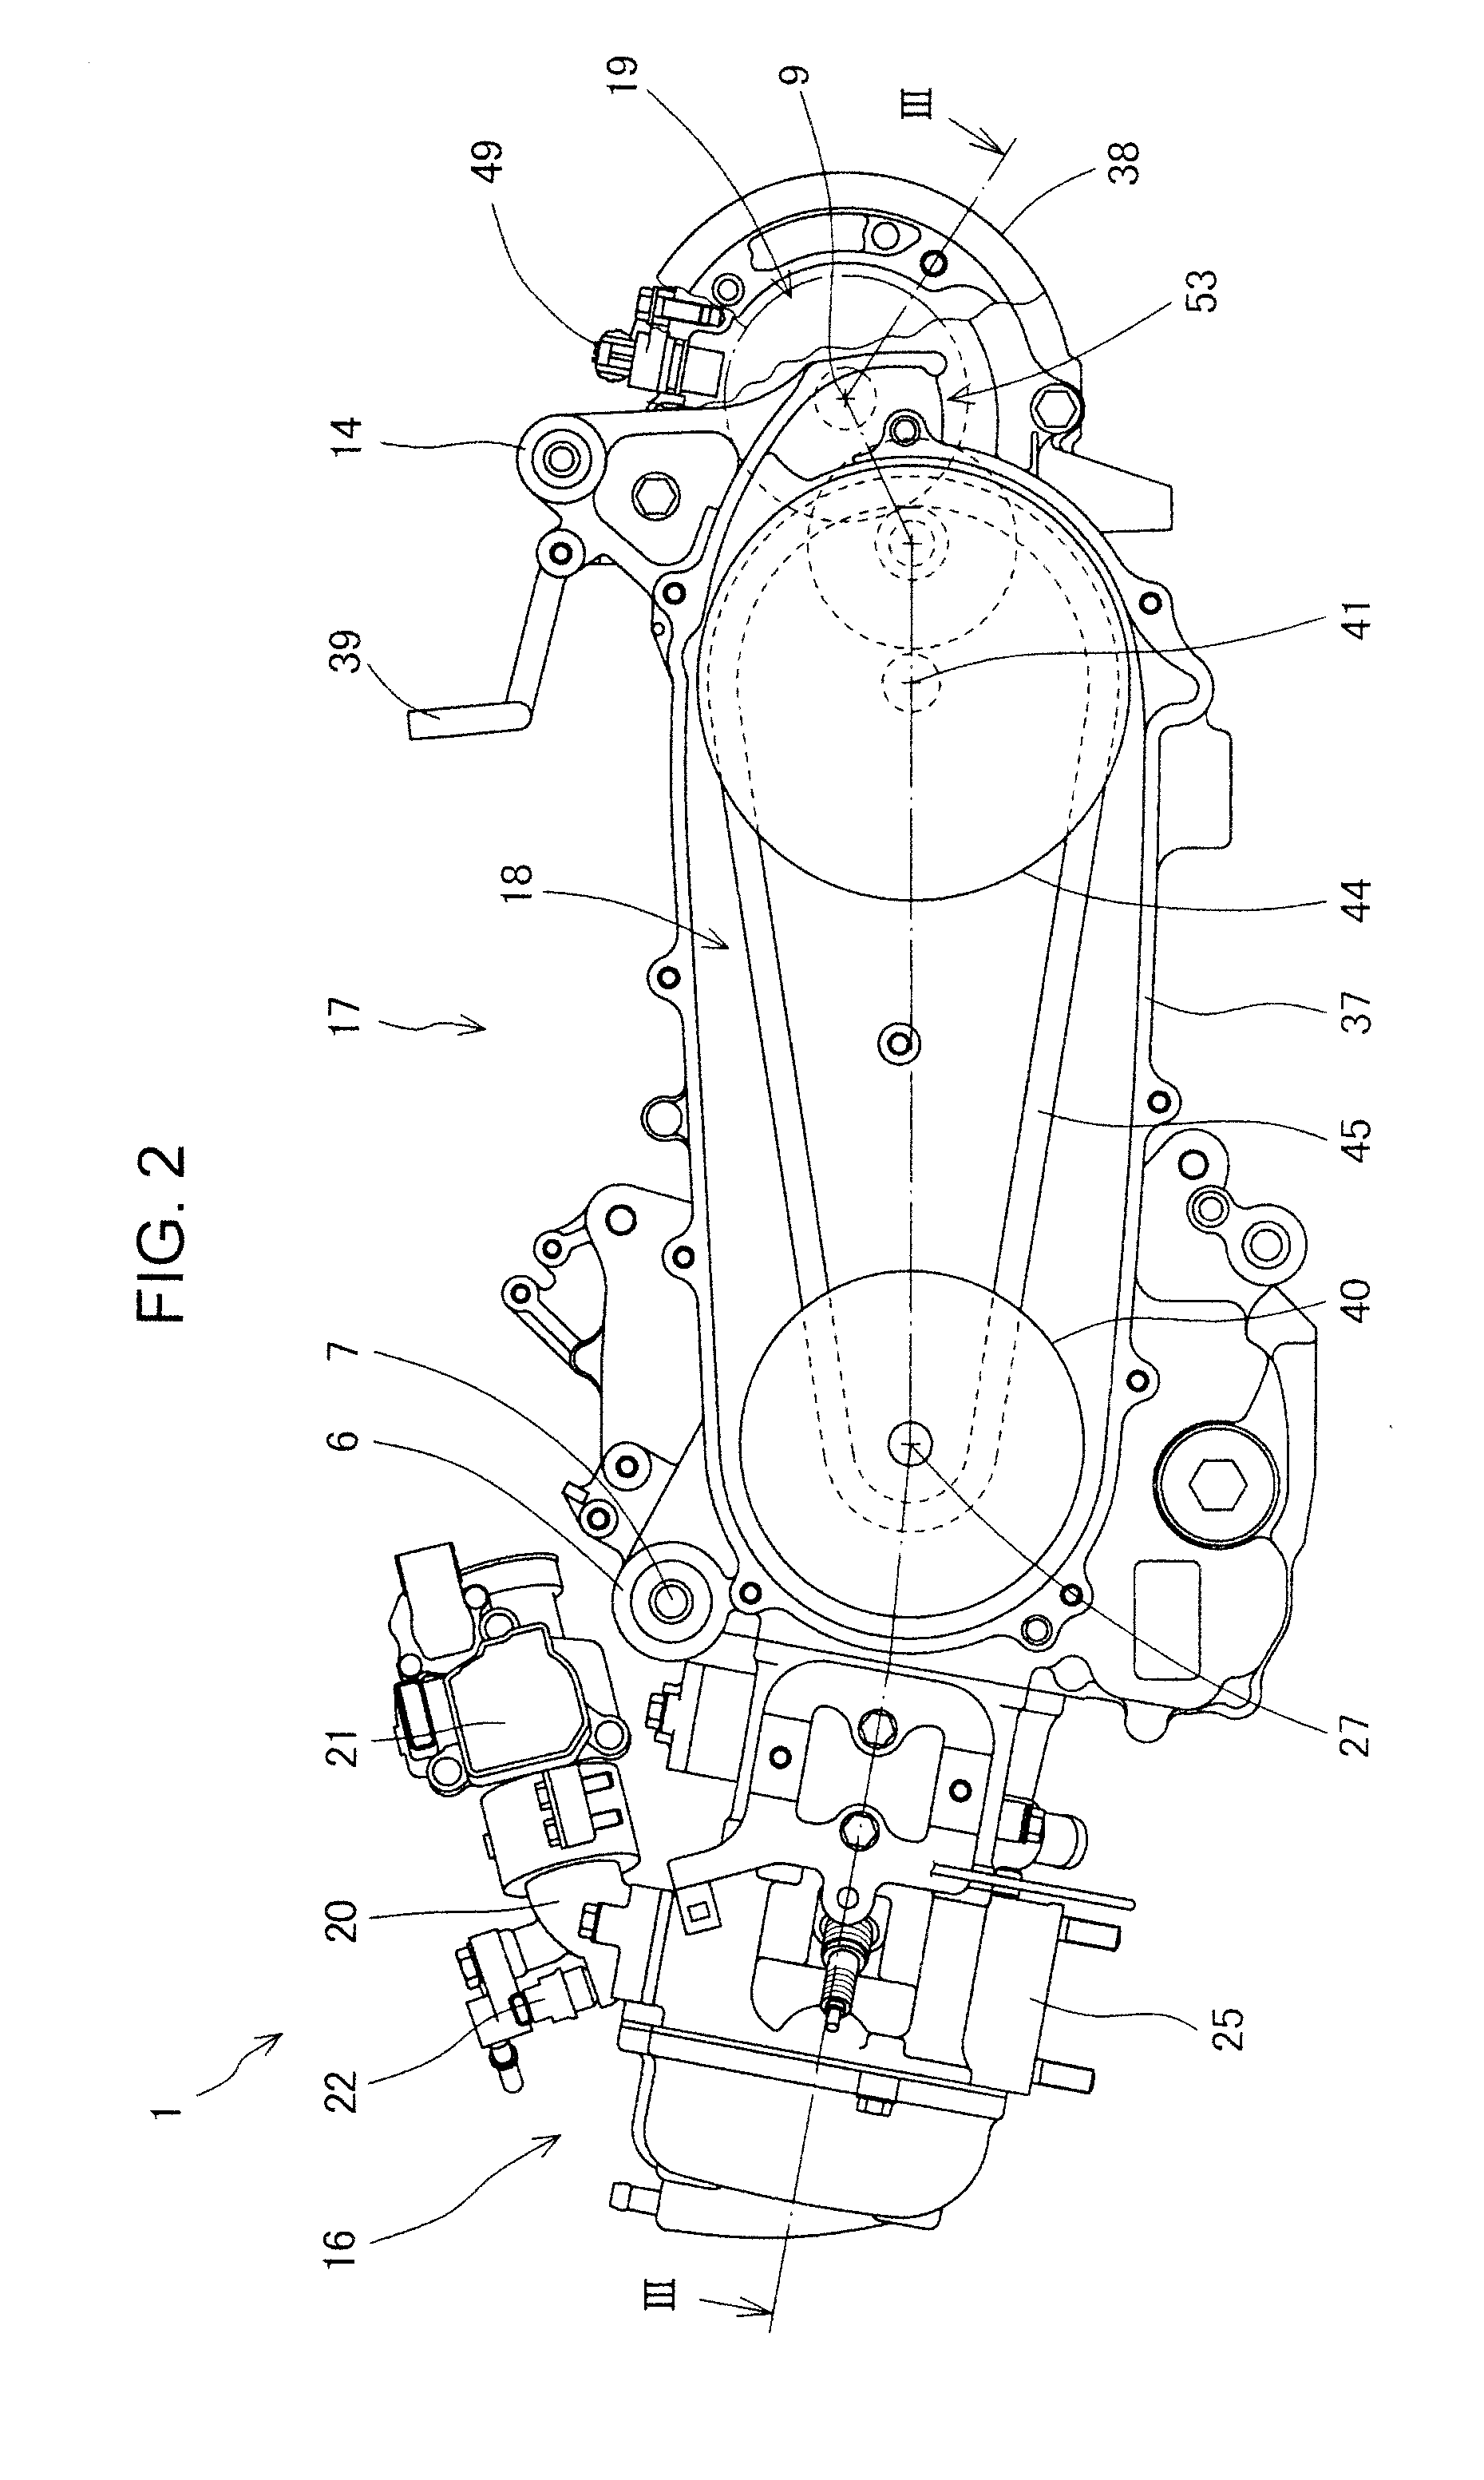 Cooling air intake structure for V-belt drive continuously variable transmission